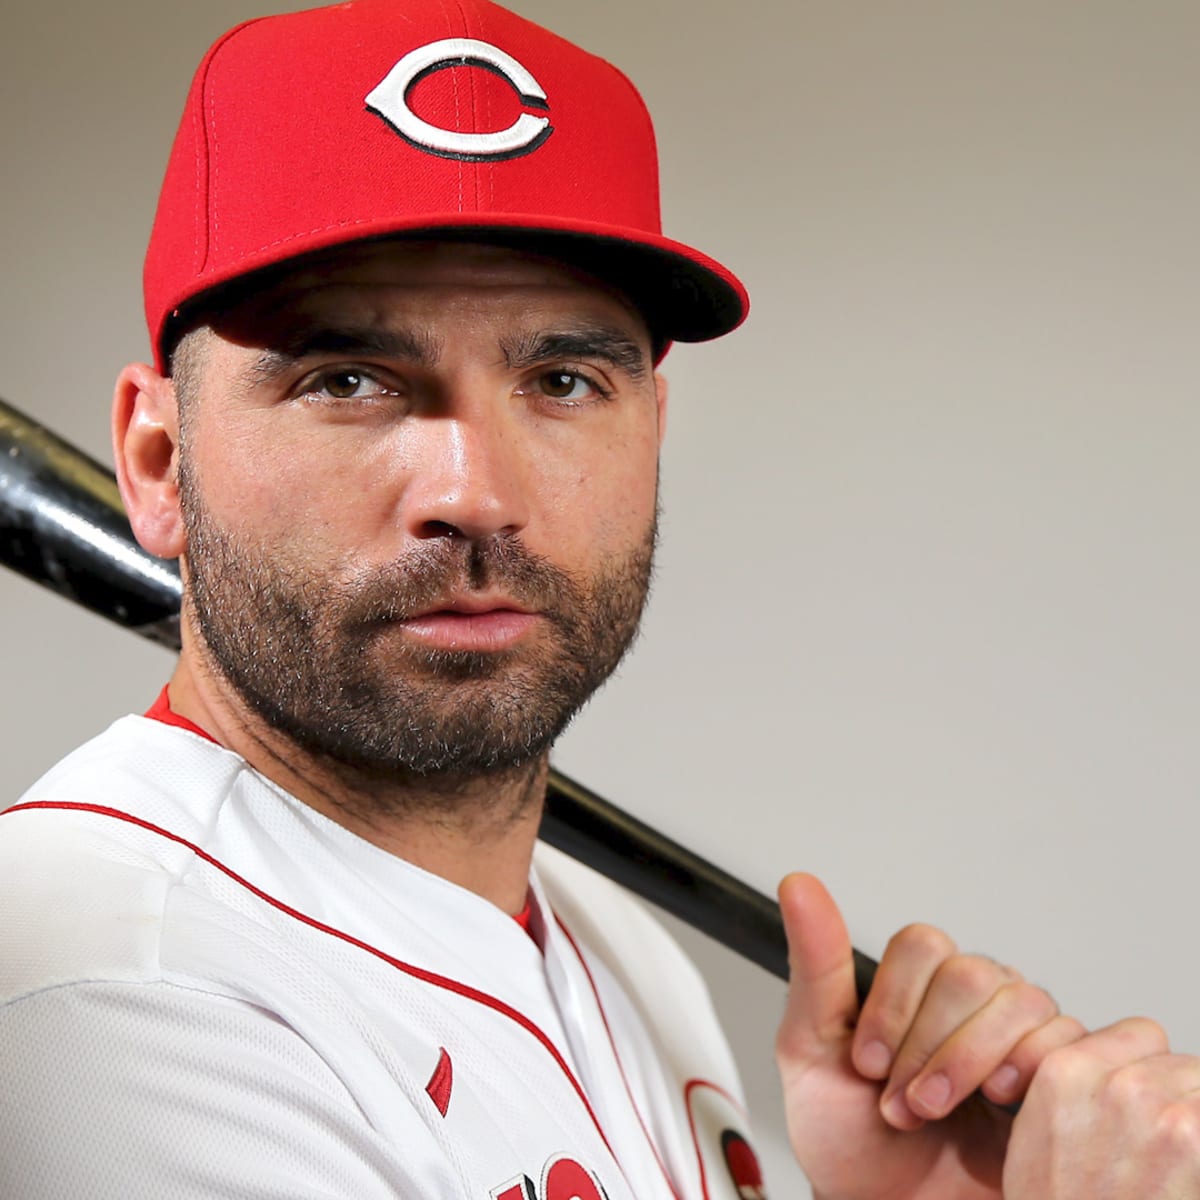 Cincinnati Reds First Baseman Joey Votto Could Be on a Very